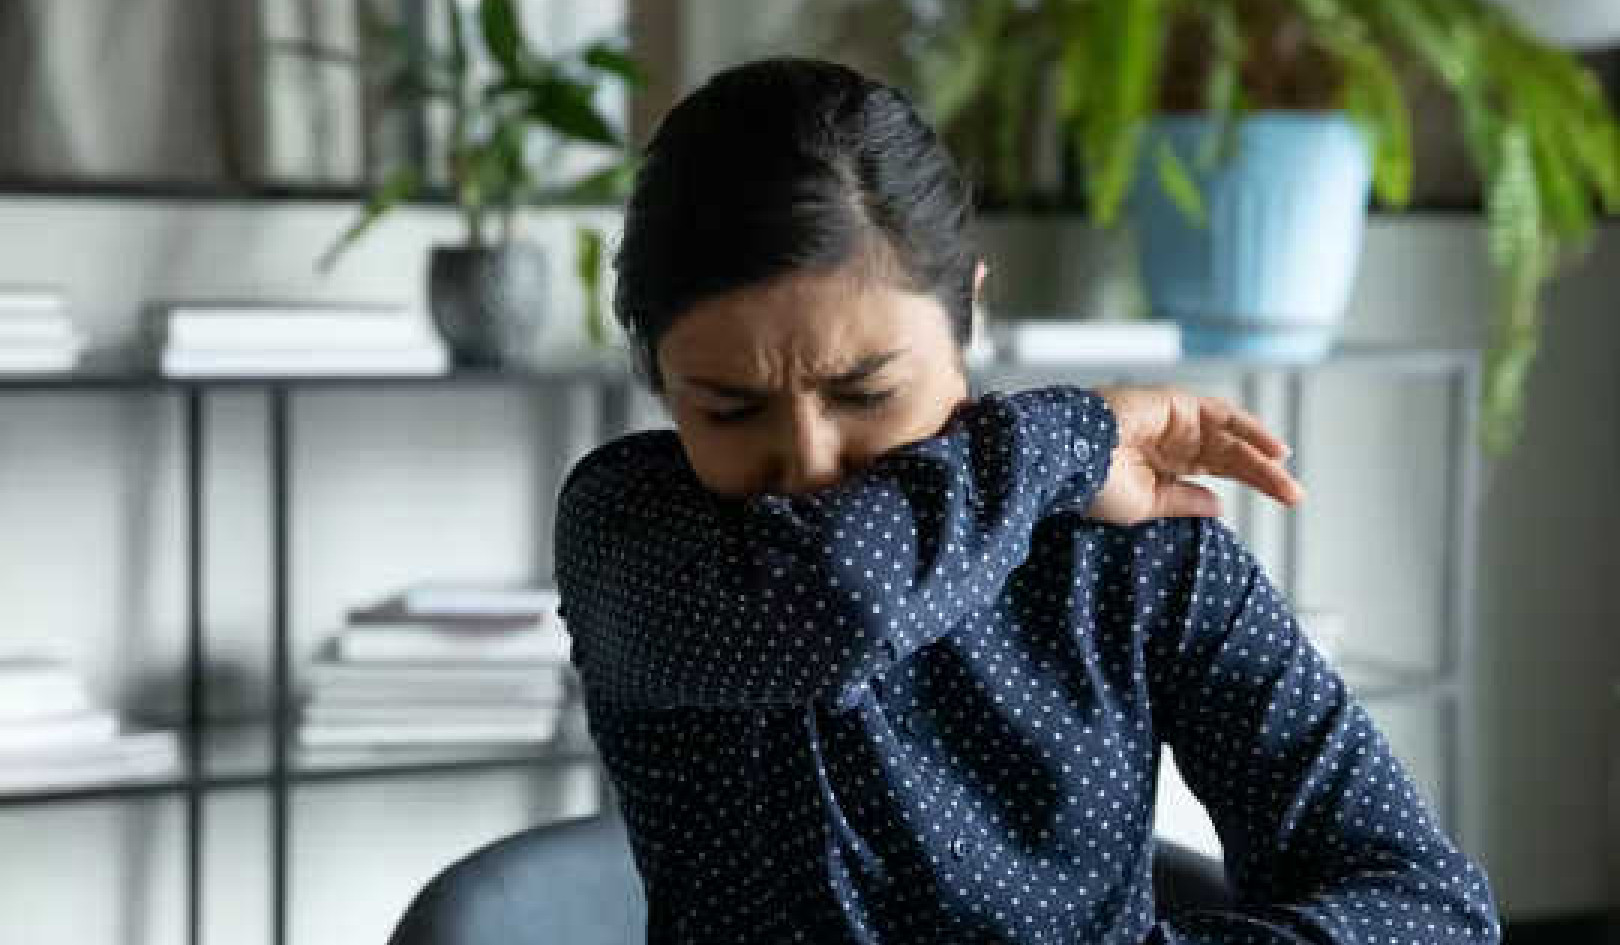 What To Do About Lingering Covid Cough